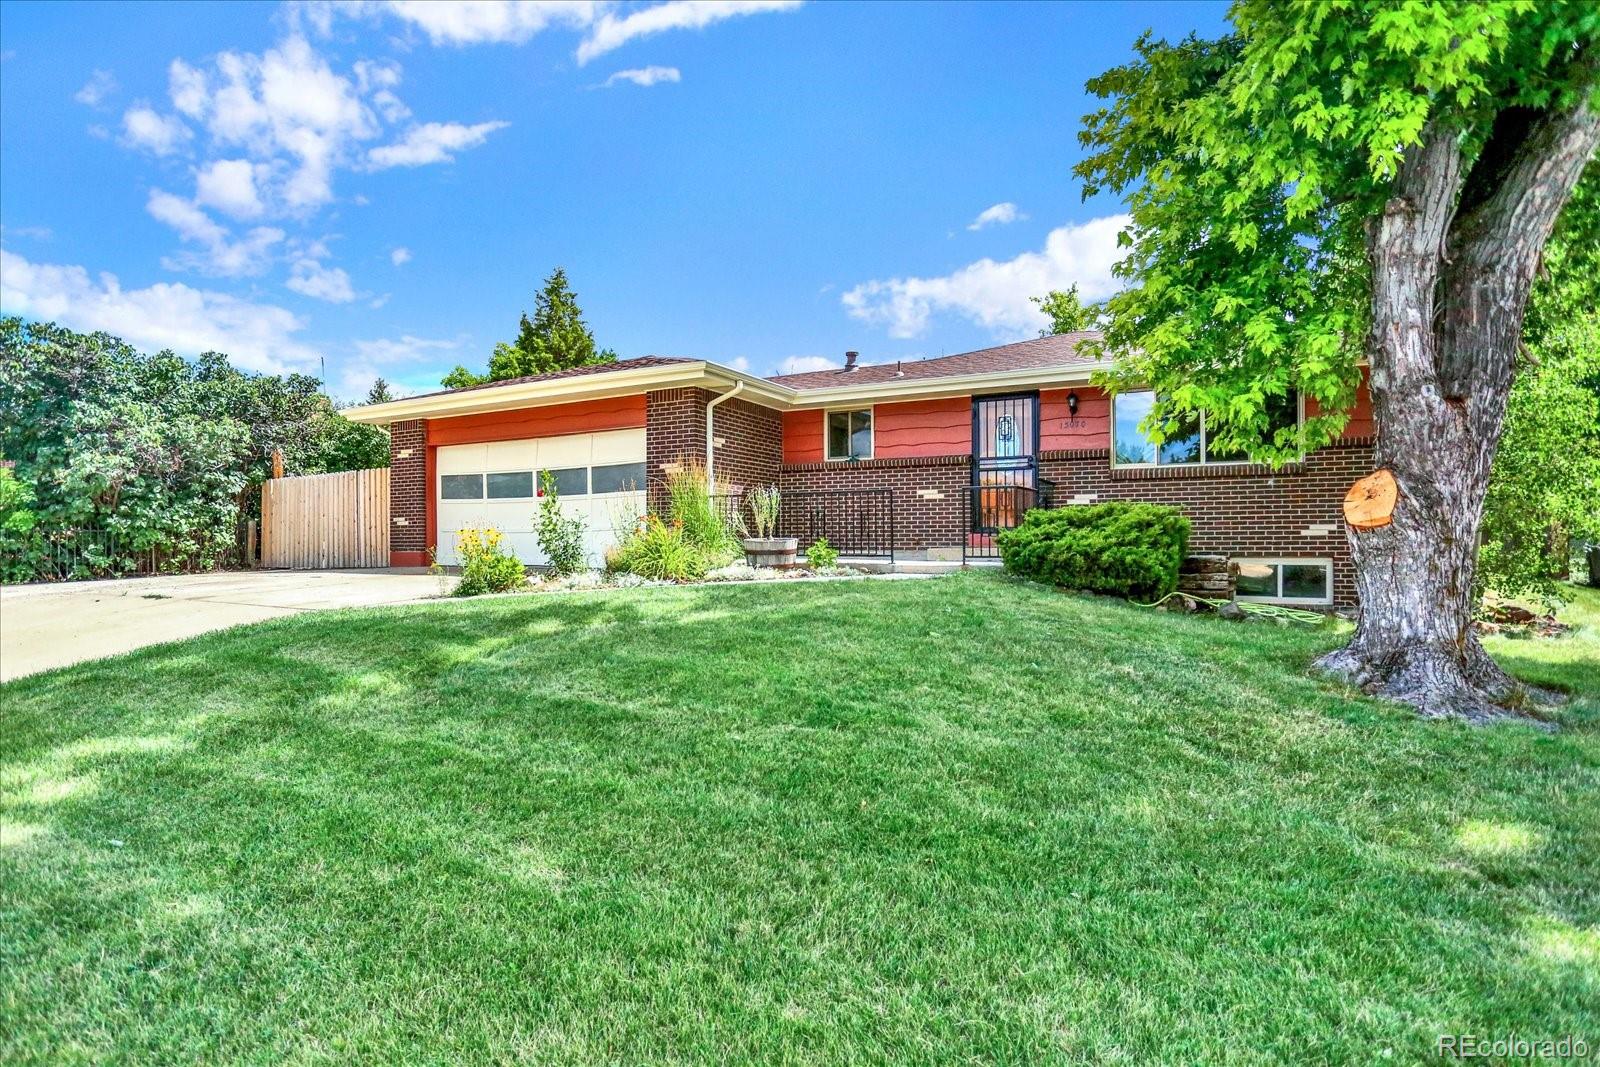 Report Image for 13070 W 6th Place,Lakewood, Colorado